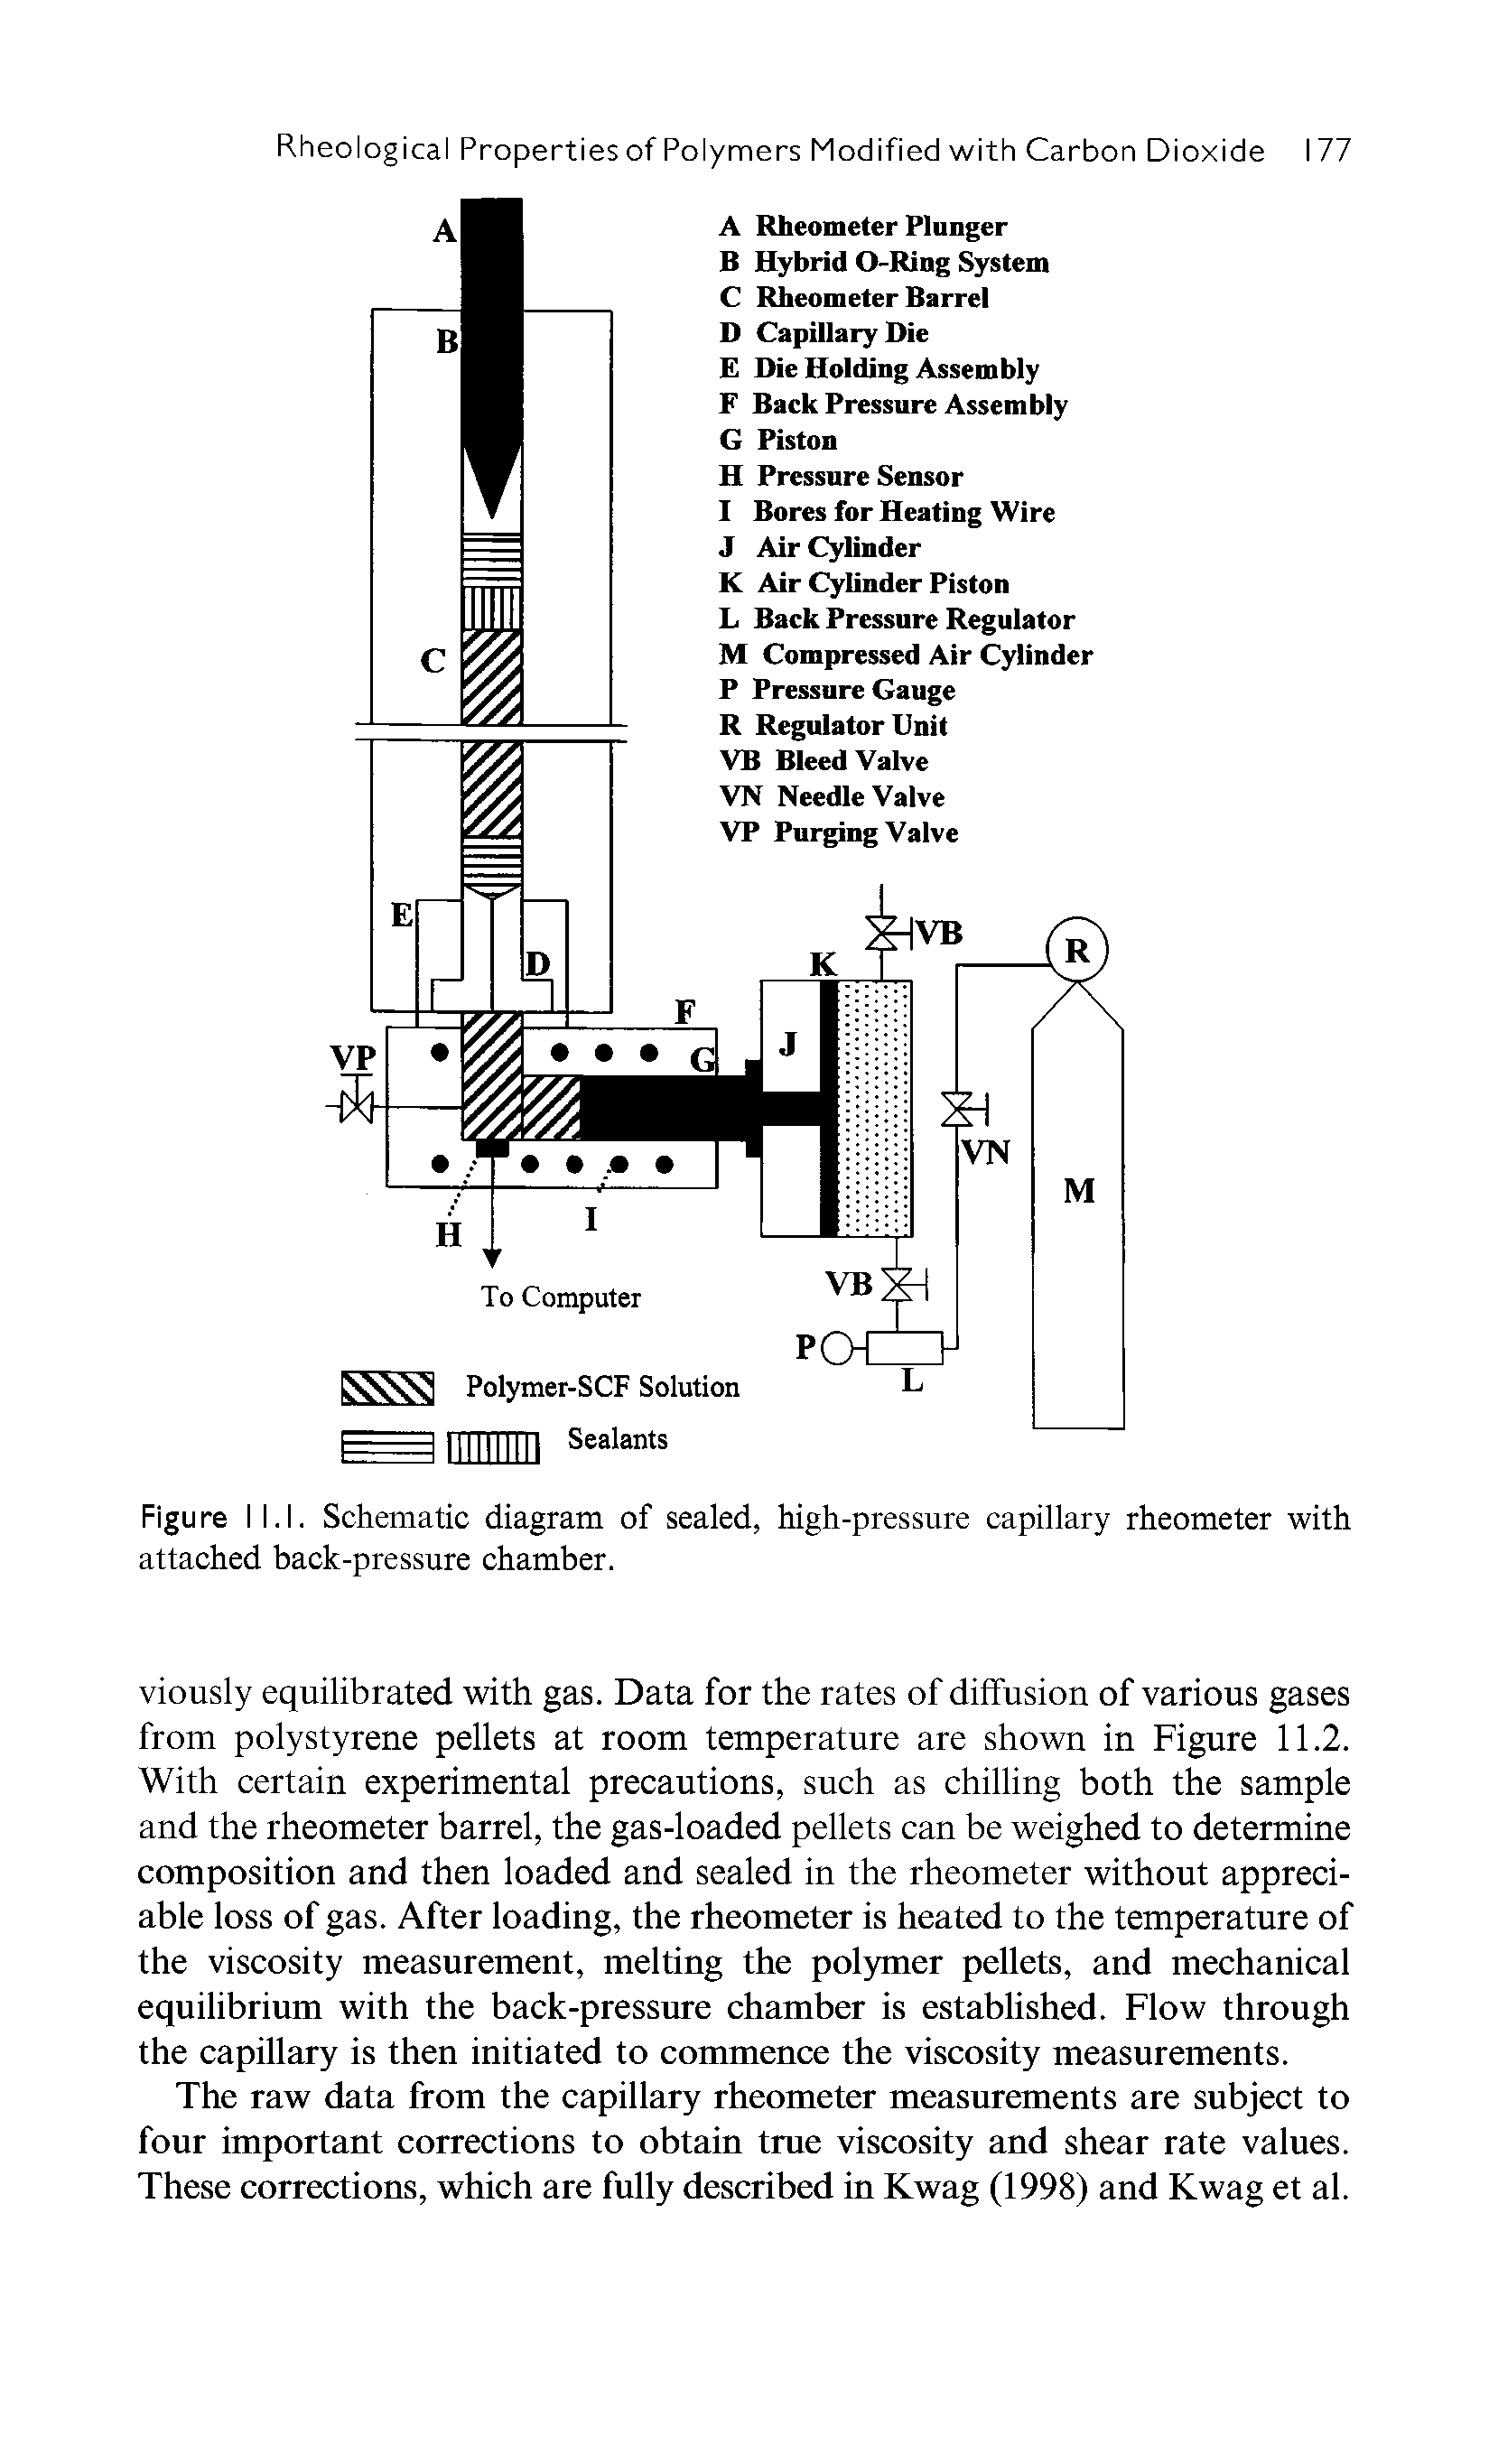 Figure I l.l. Schematic diagram of sealed, high-pressure capillary rheometer with attached back-pressure chamber.